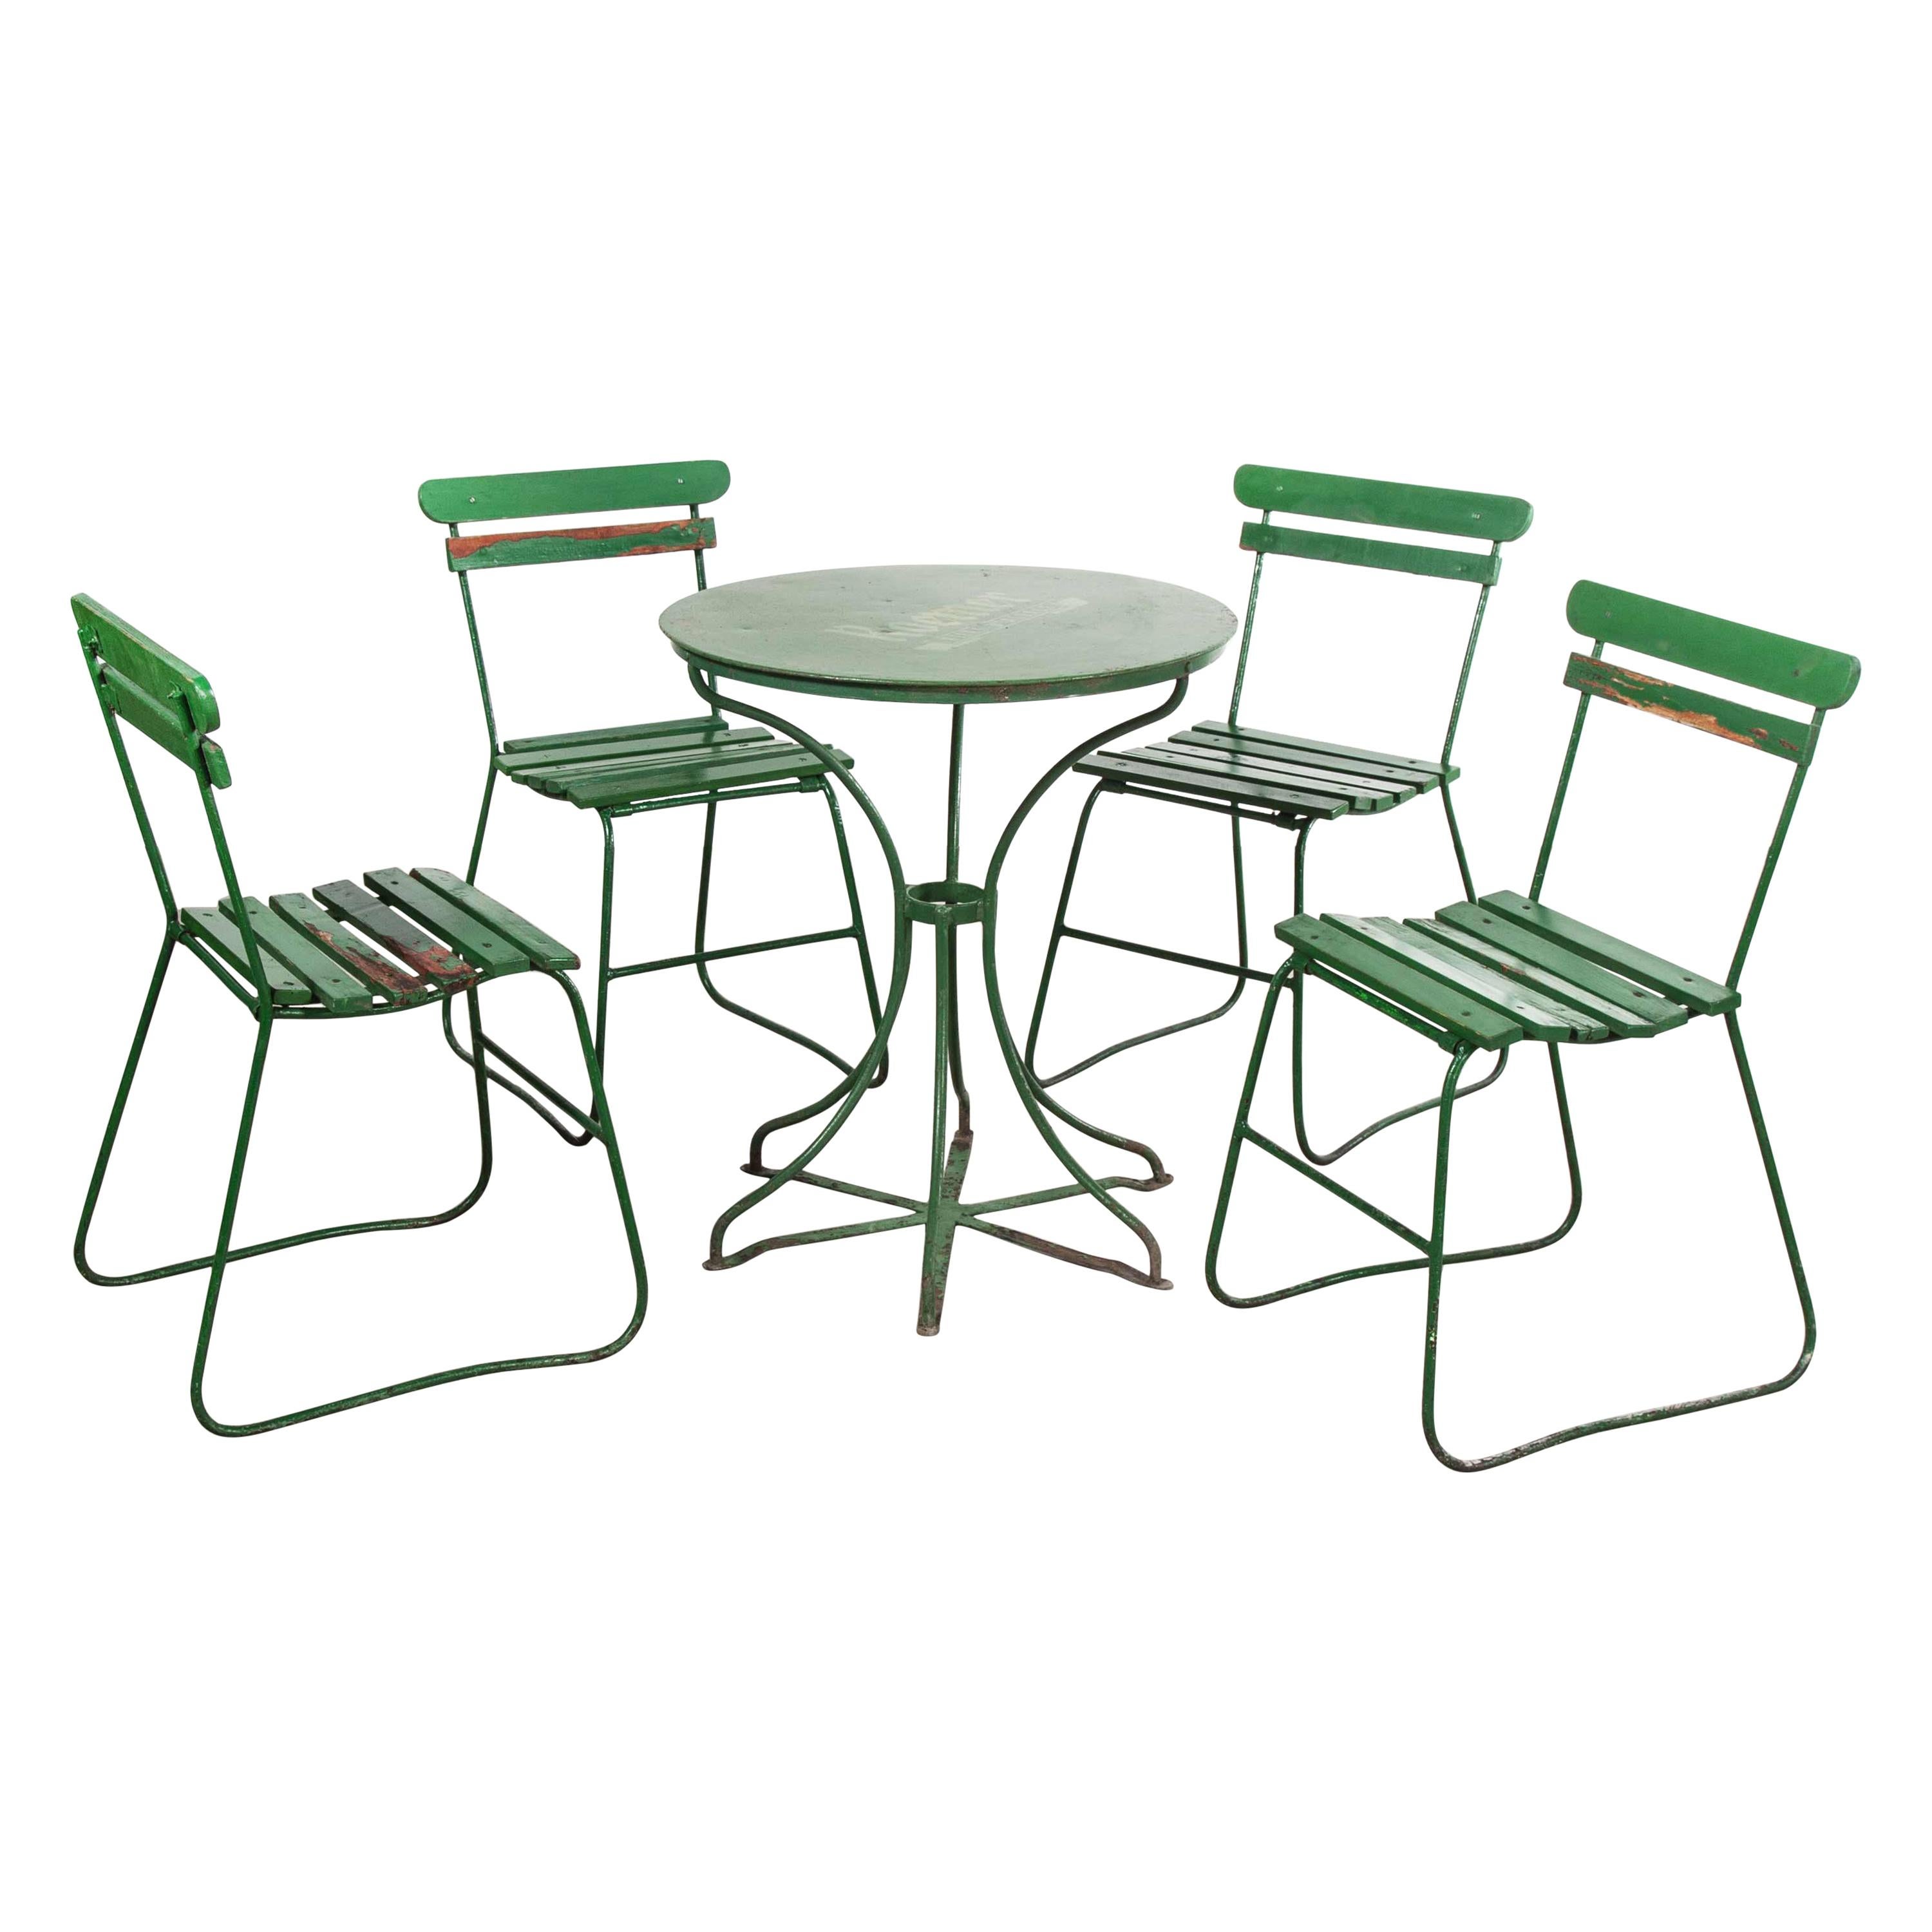 1940's Original French Green Garden Set, Table and Four Chairs